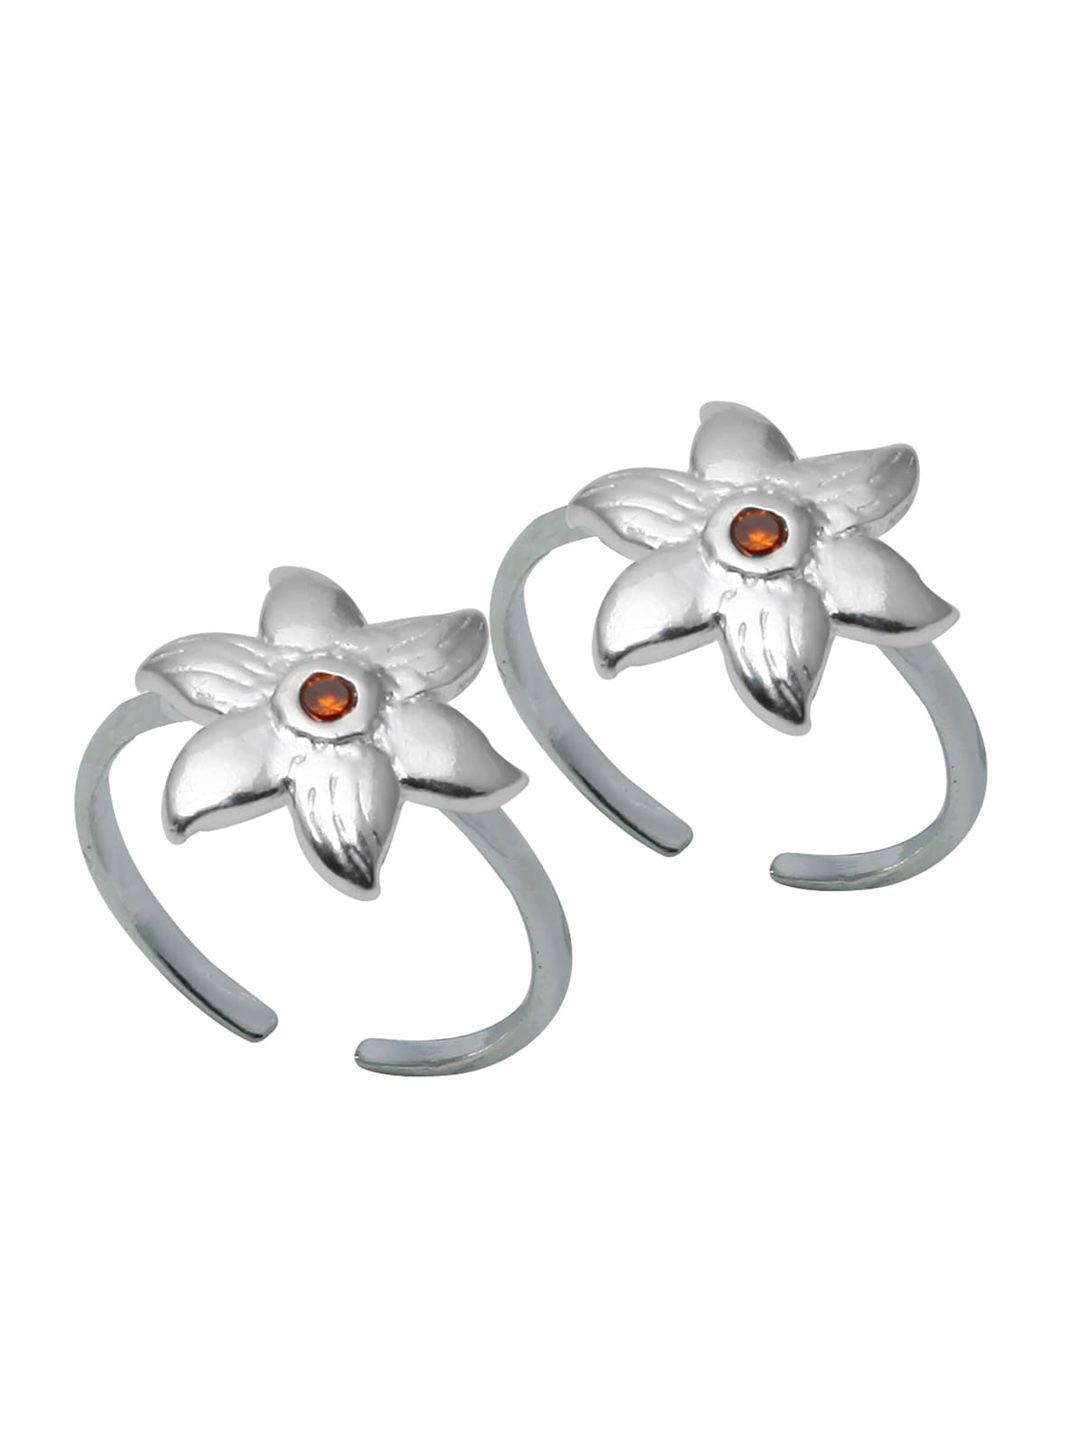 abhooshan-92.5-sterling-silver-cz-studded-adjustable-toe-rings